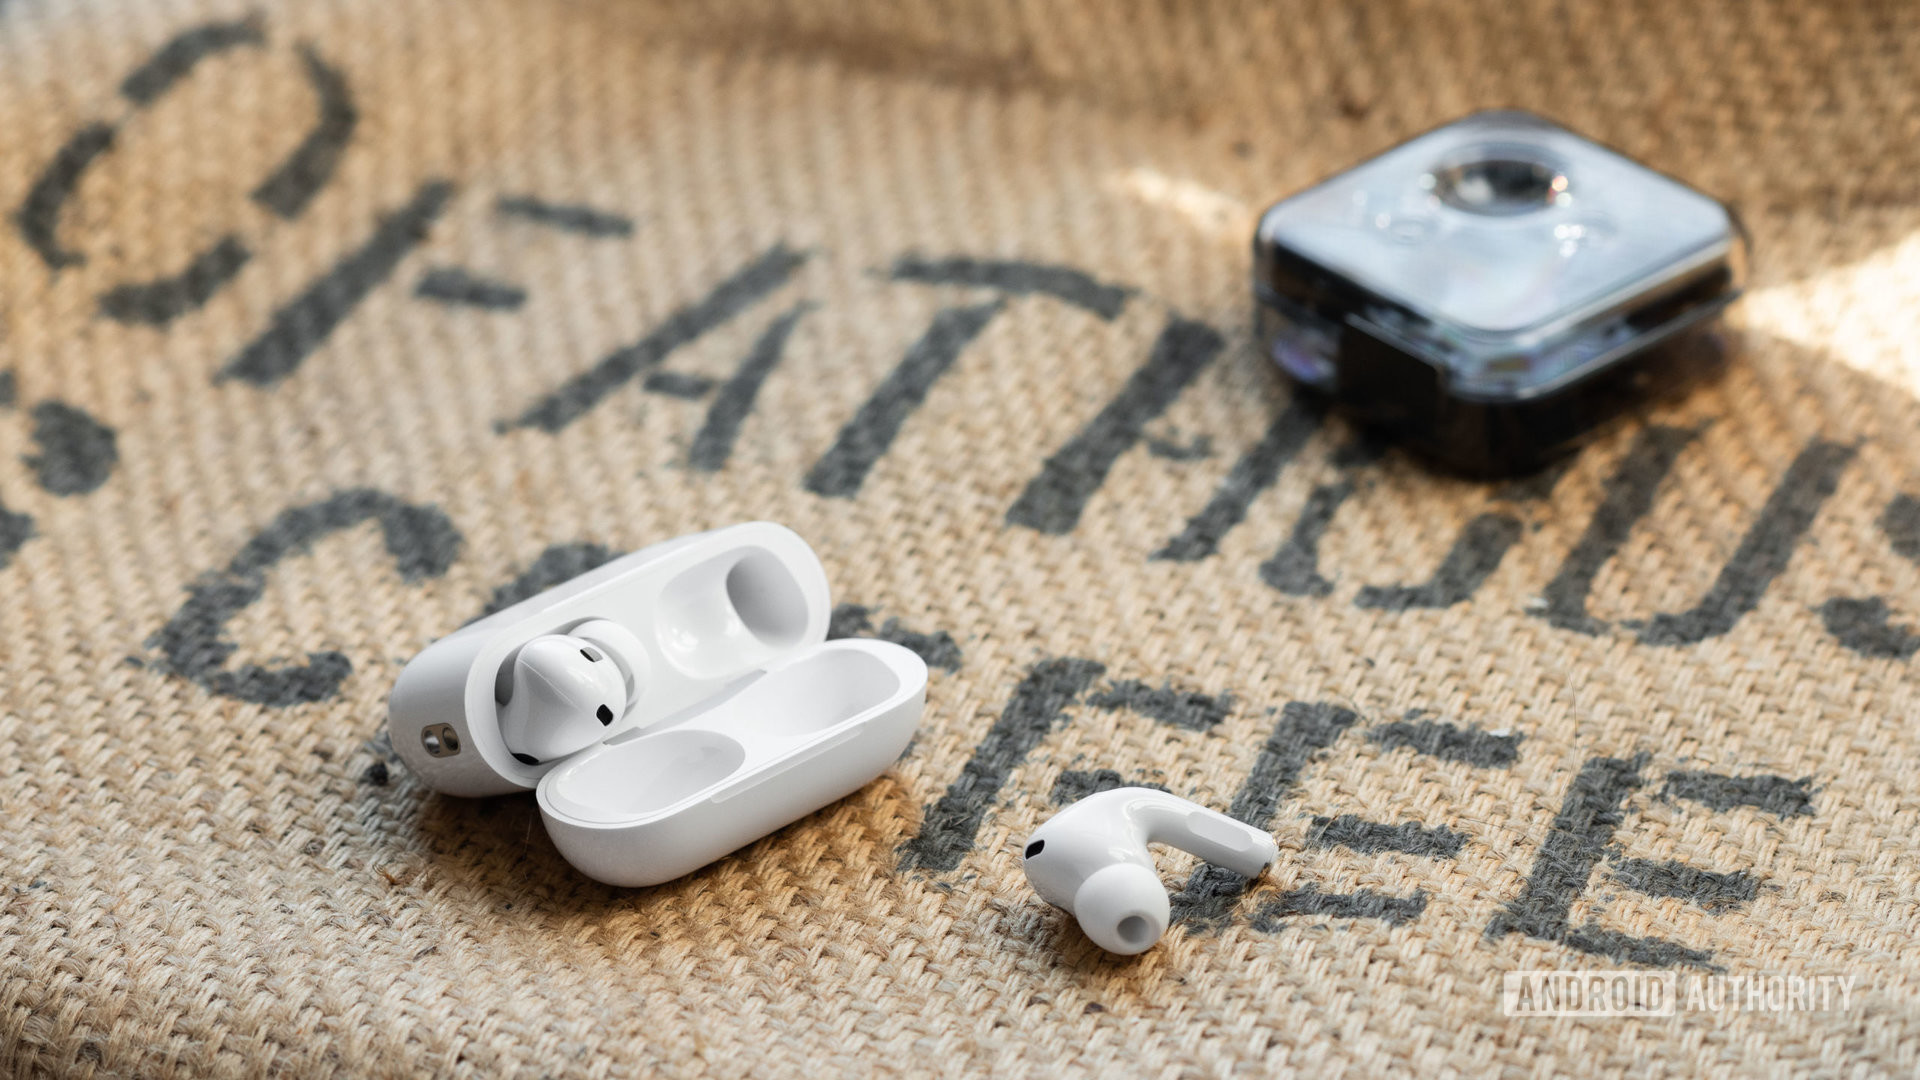 The Apple AirPods Pro (2nd generation) case open with one of the earbuds on a burlap sack, and the Nothing Ear 1 case in the background.